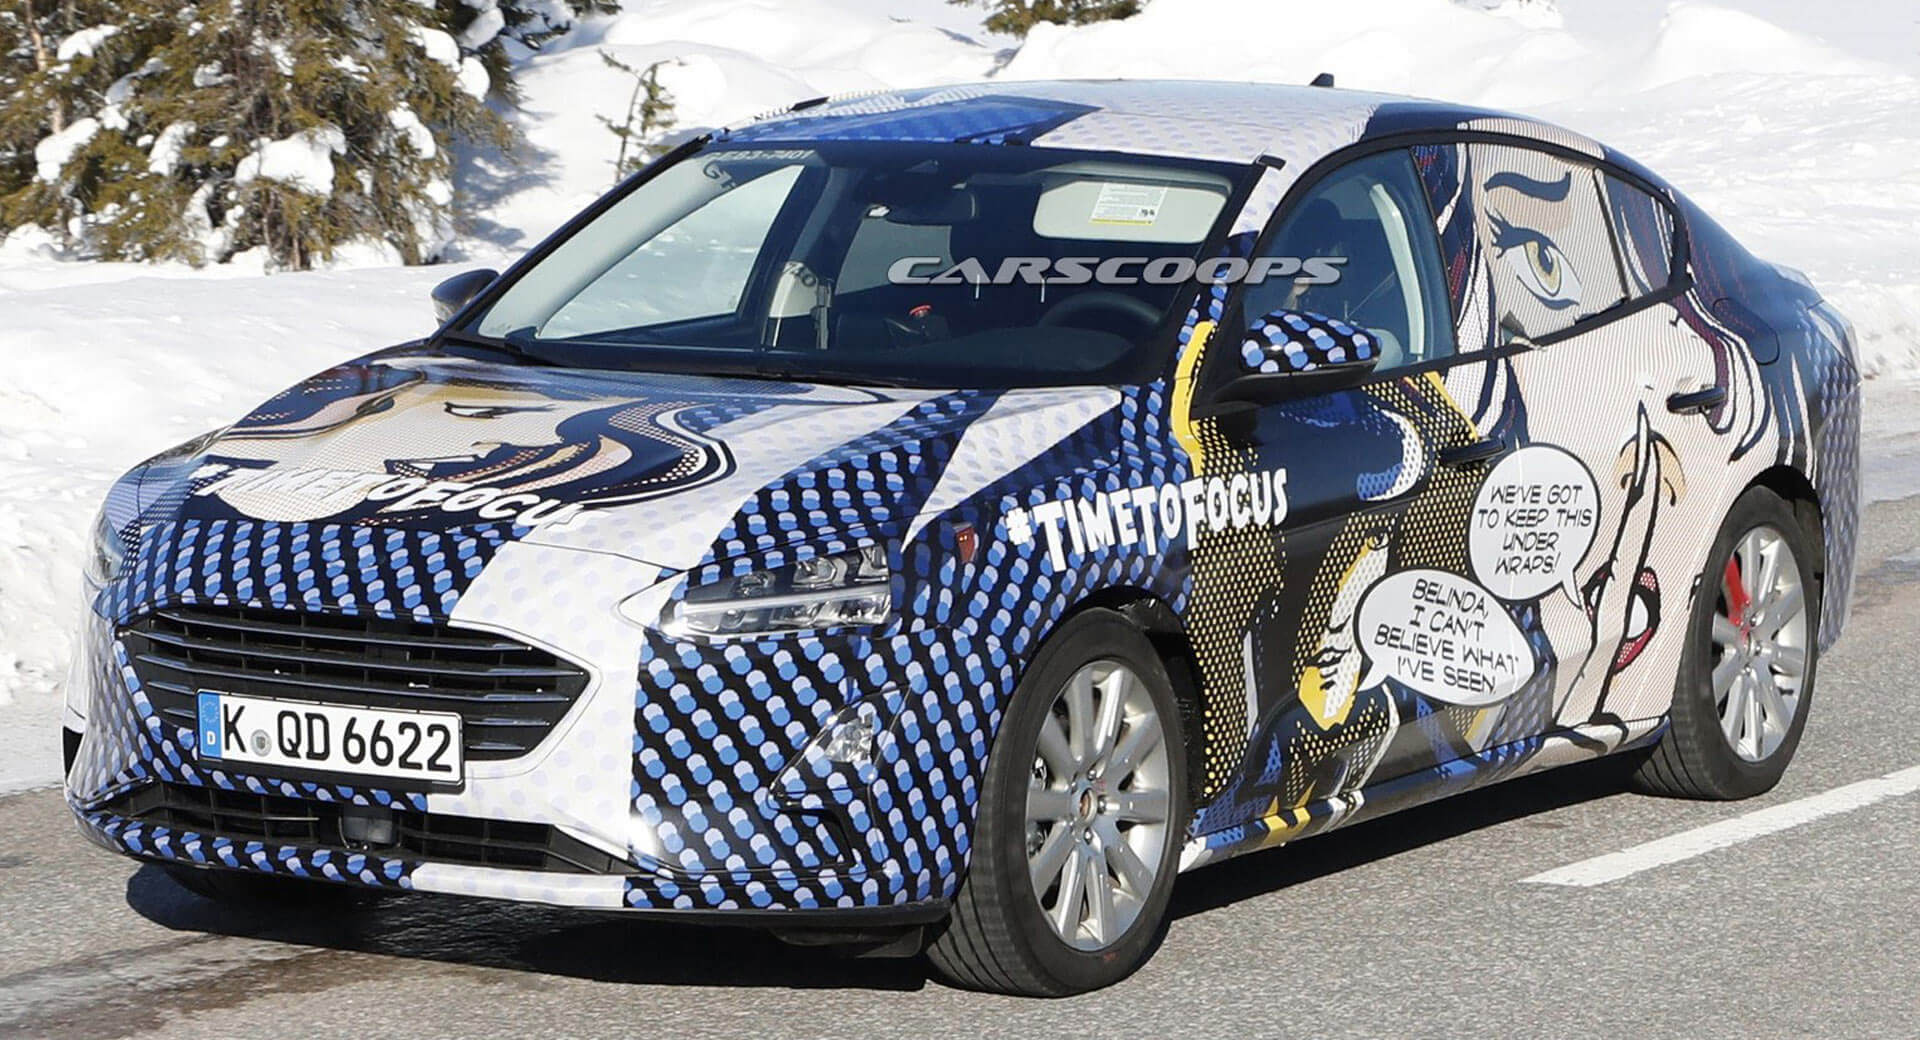 2019 Ford Focus Sedan Spied, Will Be Imported To U.S. From China